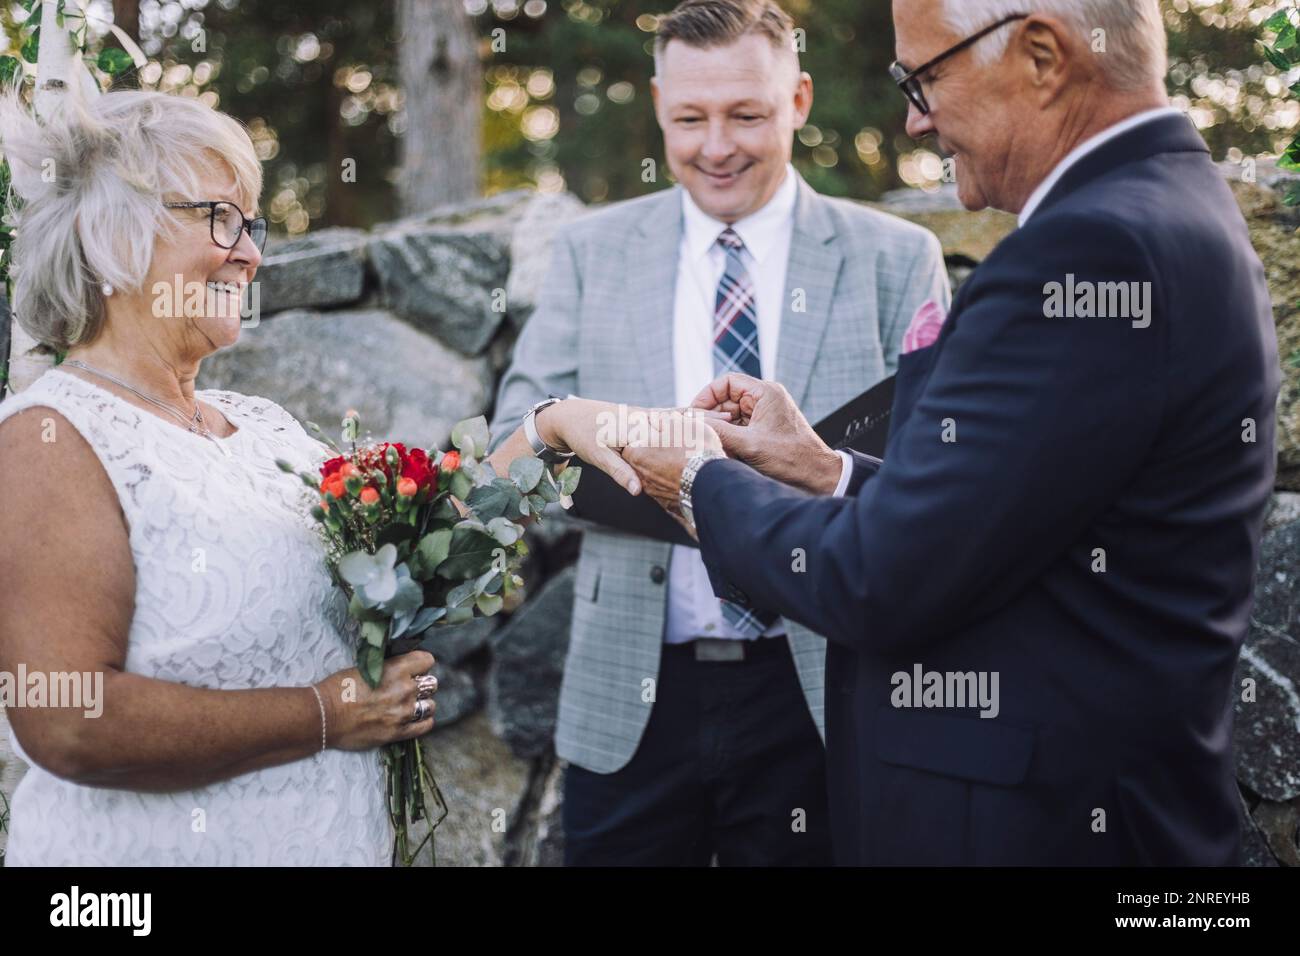 Senior groom putting wedding ring in bride's finger by minister during ceremony Stock Photo